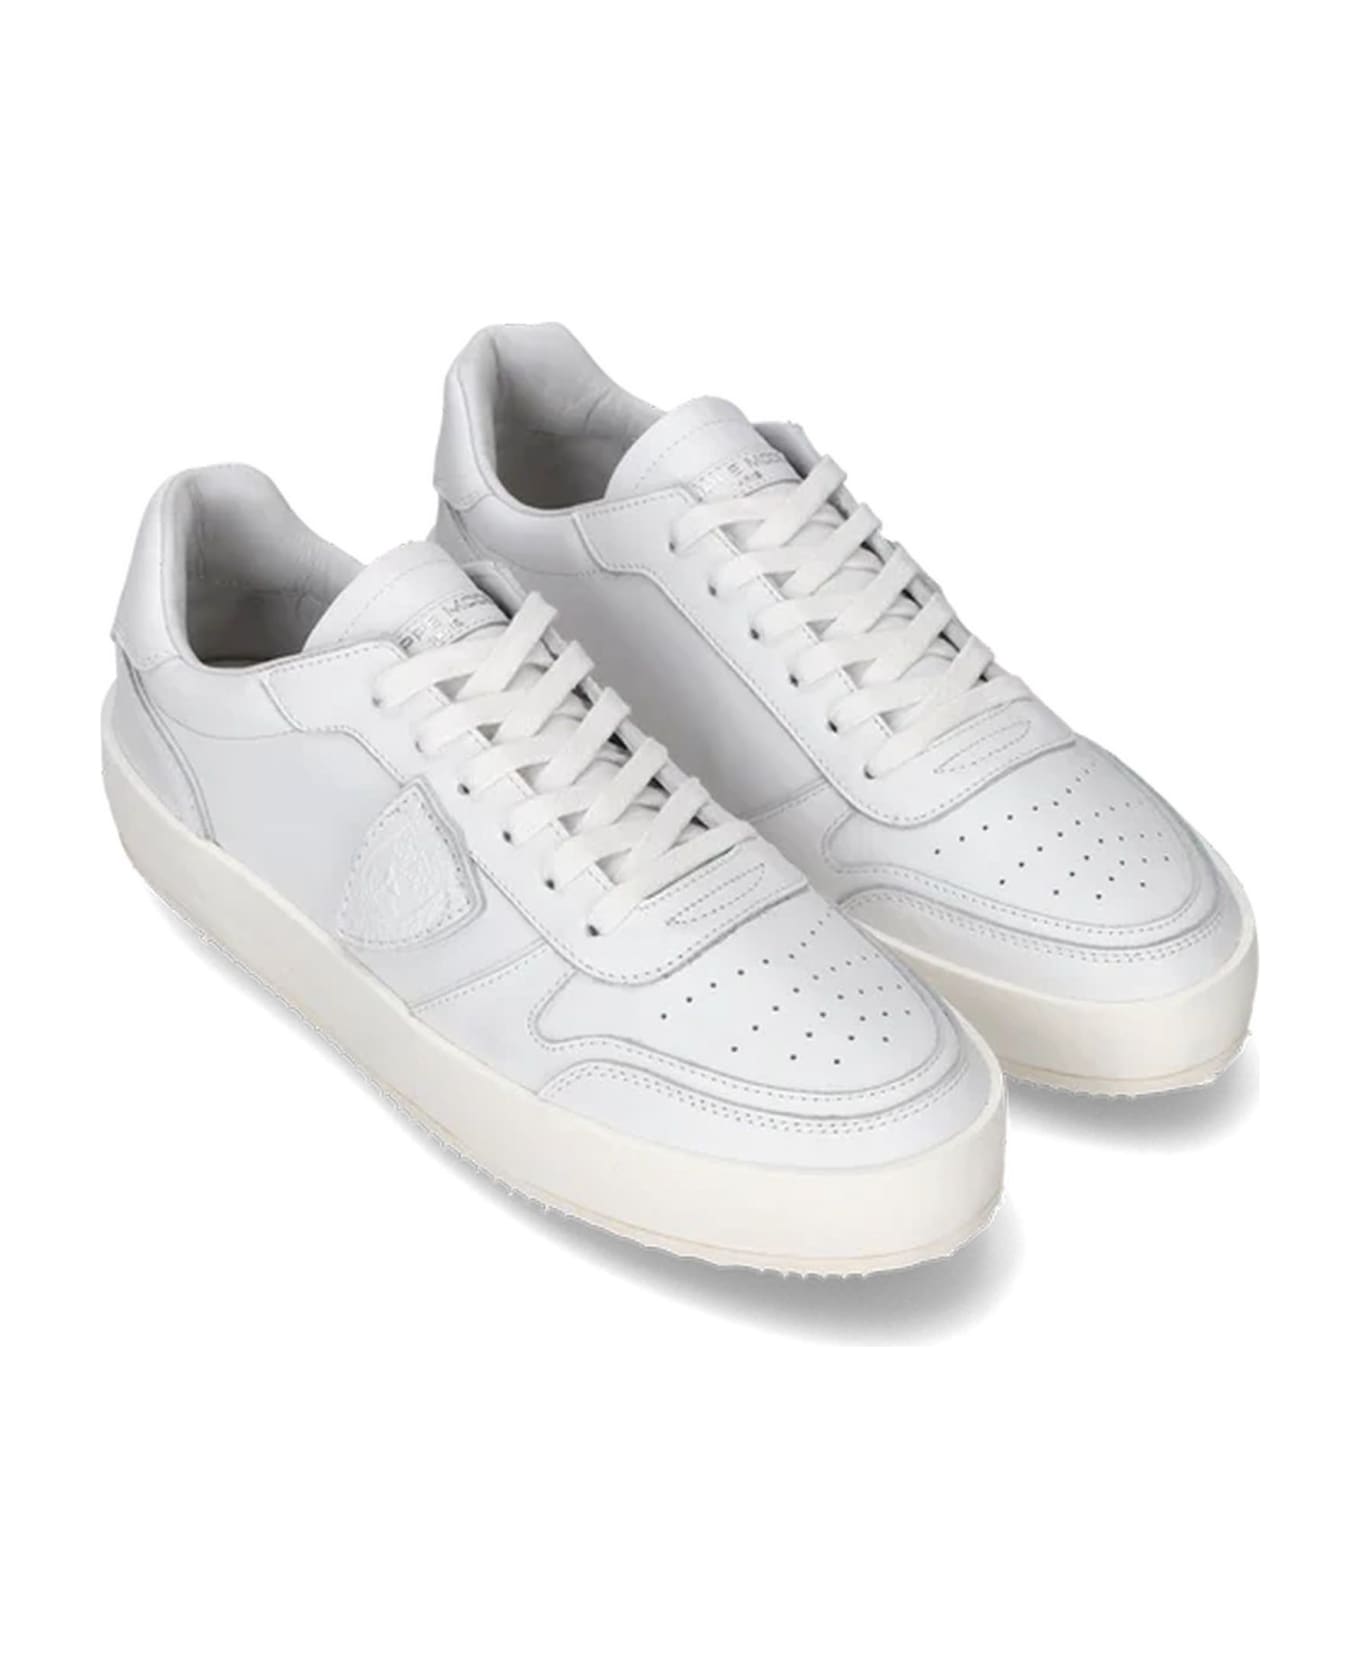 Philippe Model Nice Low-top Sneakers In Leather, White - White